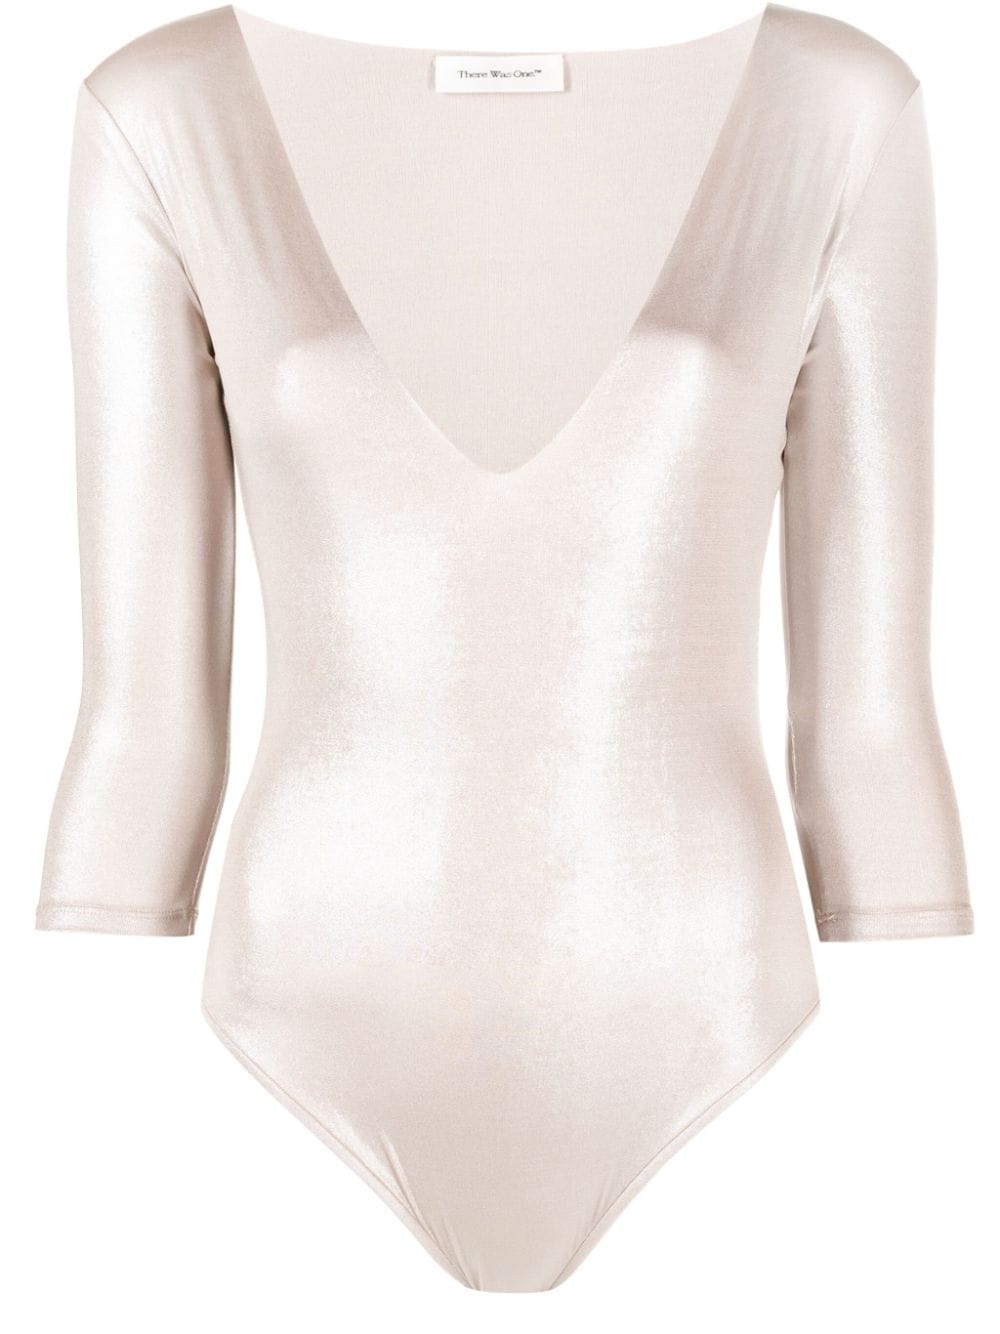 Image 1 of There Was One shiny-effect V-neck bodysuit